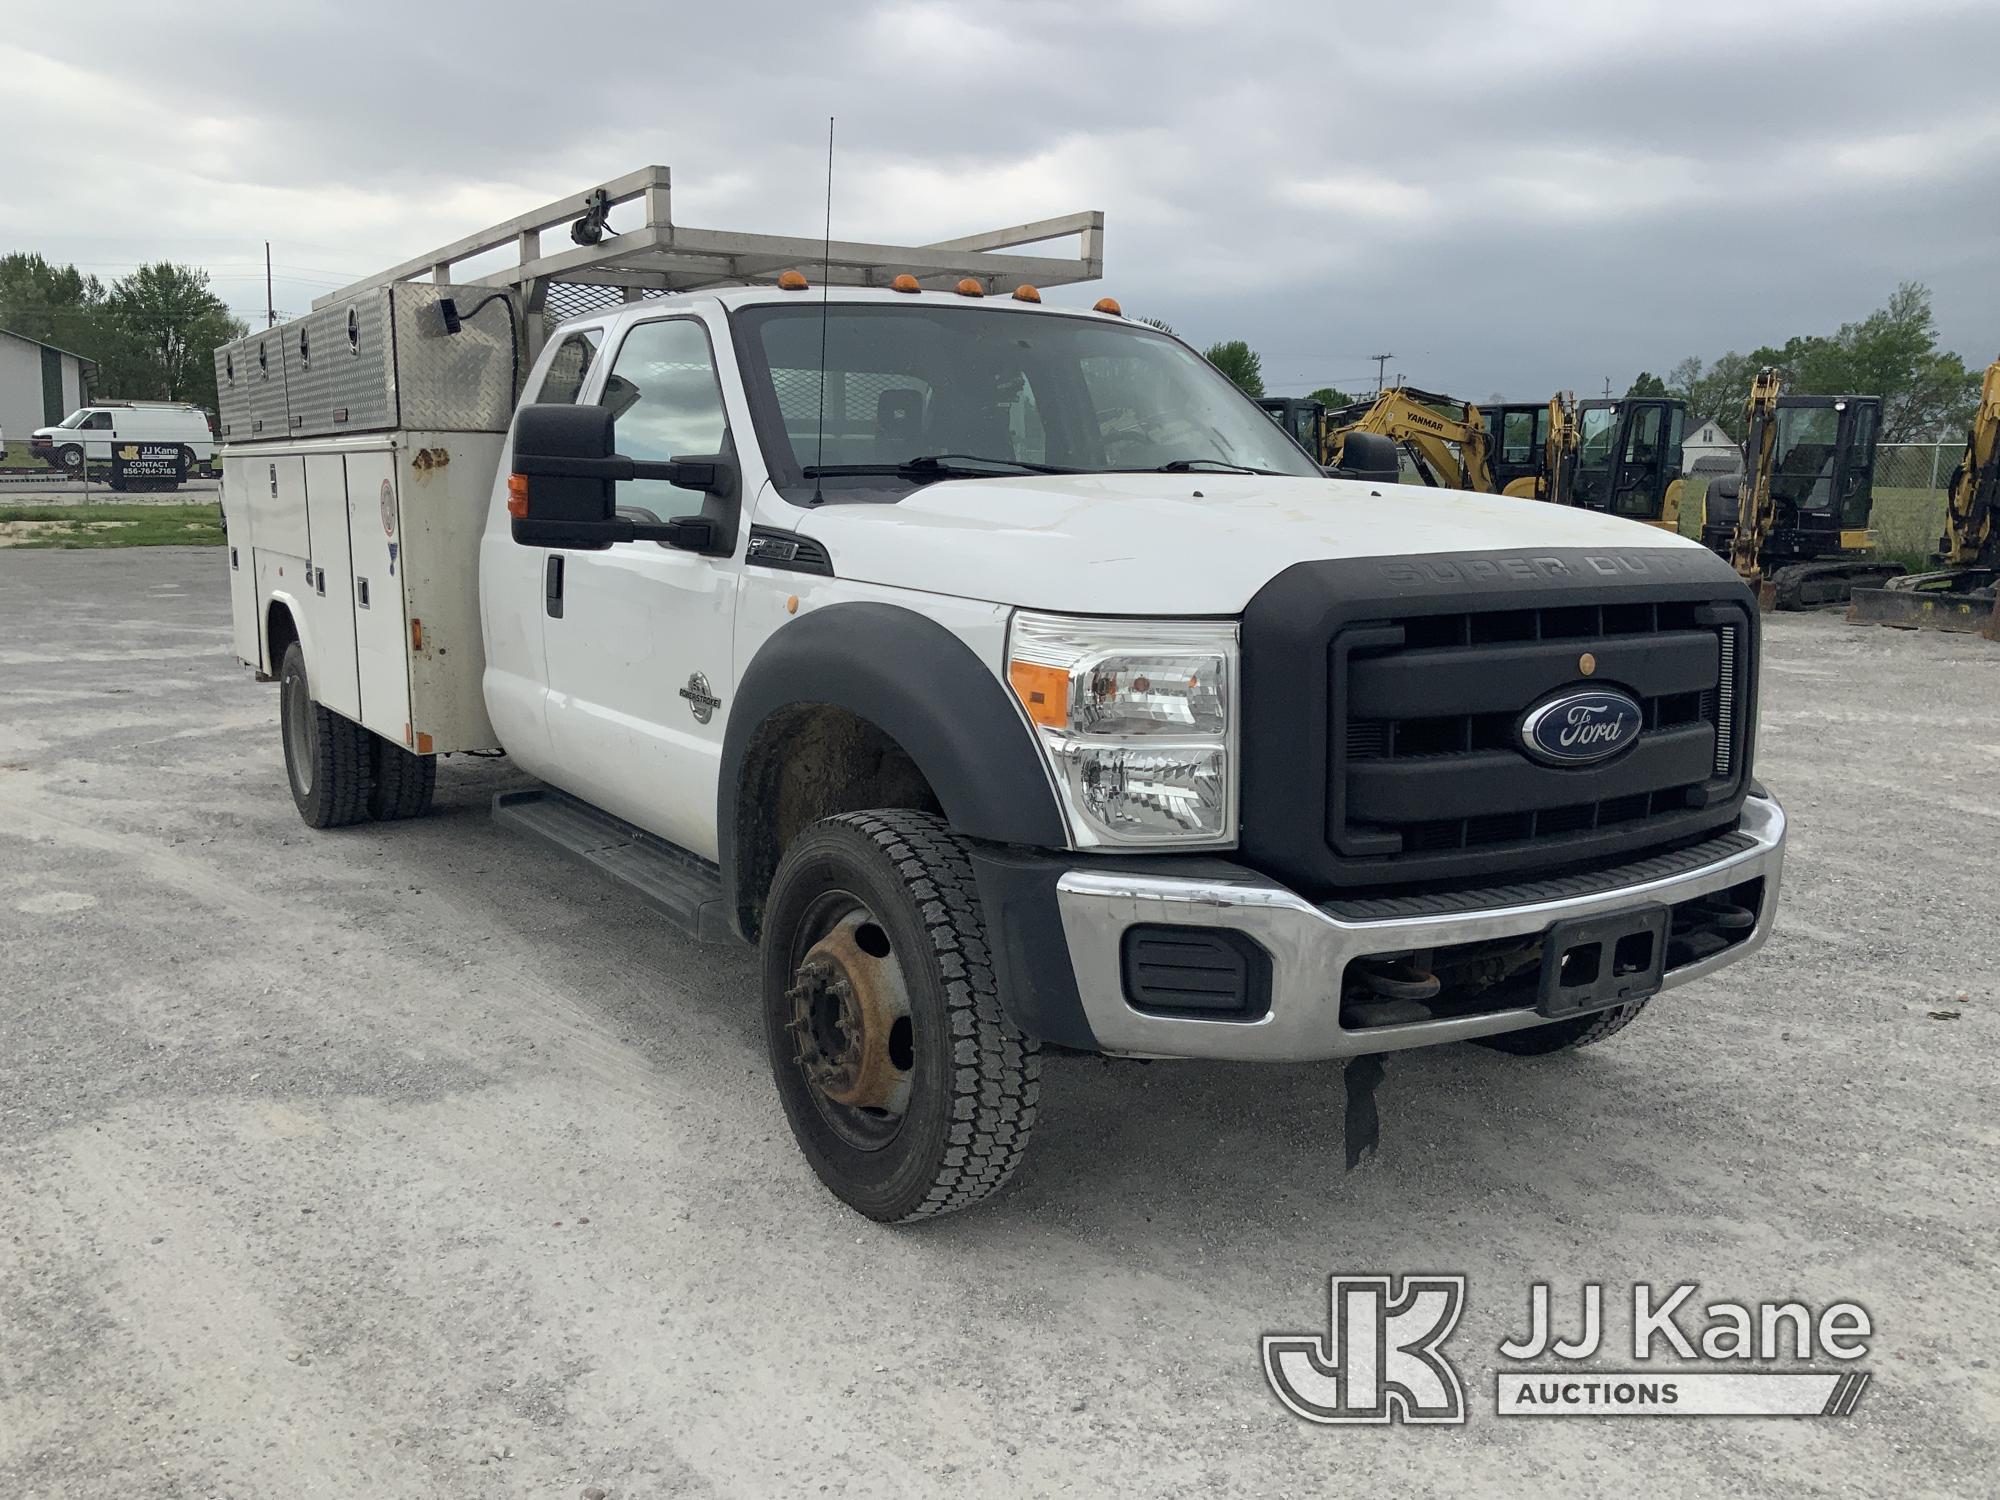 (Hawk Point, MO) 2016 Ford F550 4x4 Extended-Cab Service Truck Runs & Moves) (Body Damage